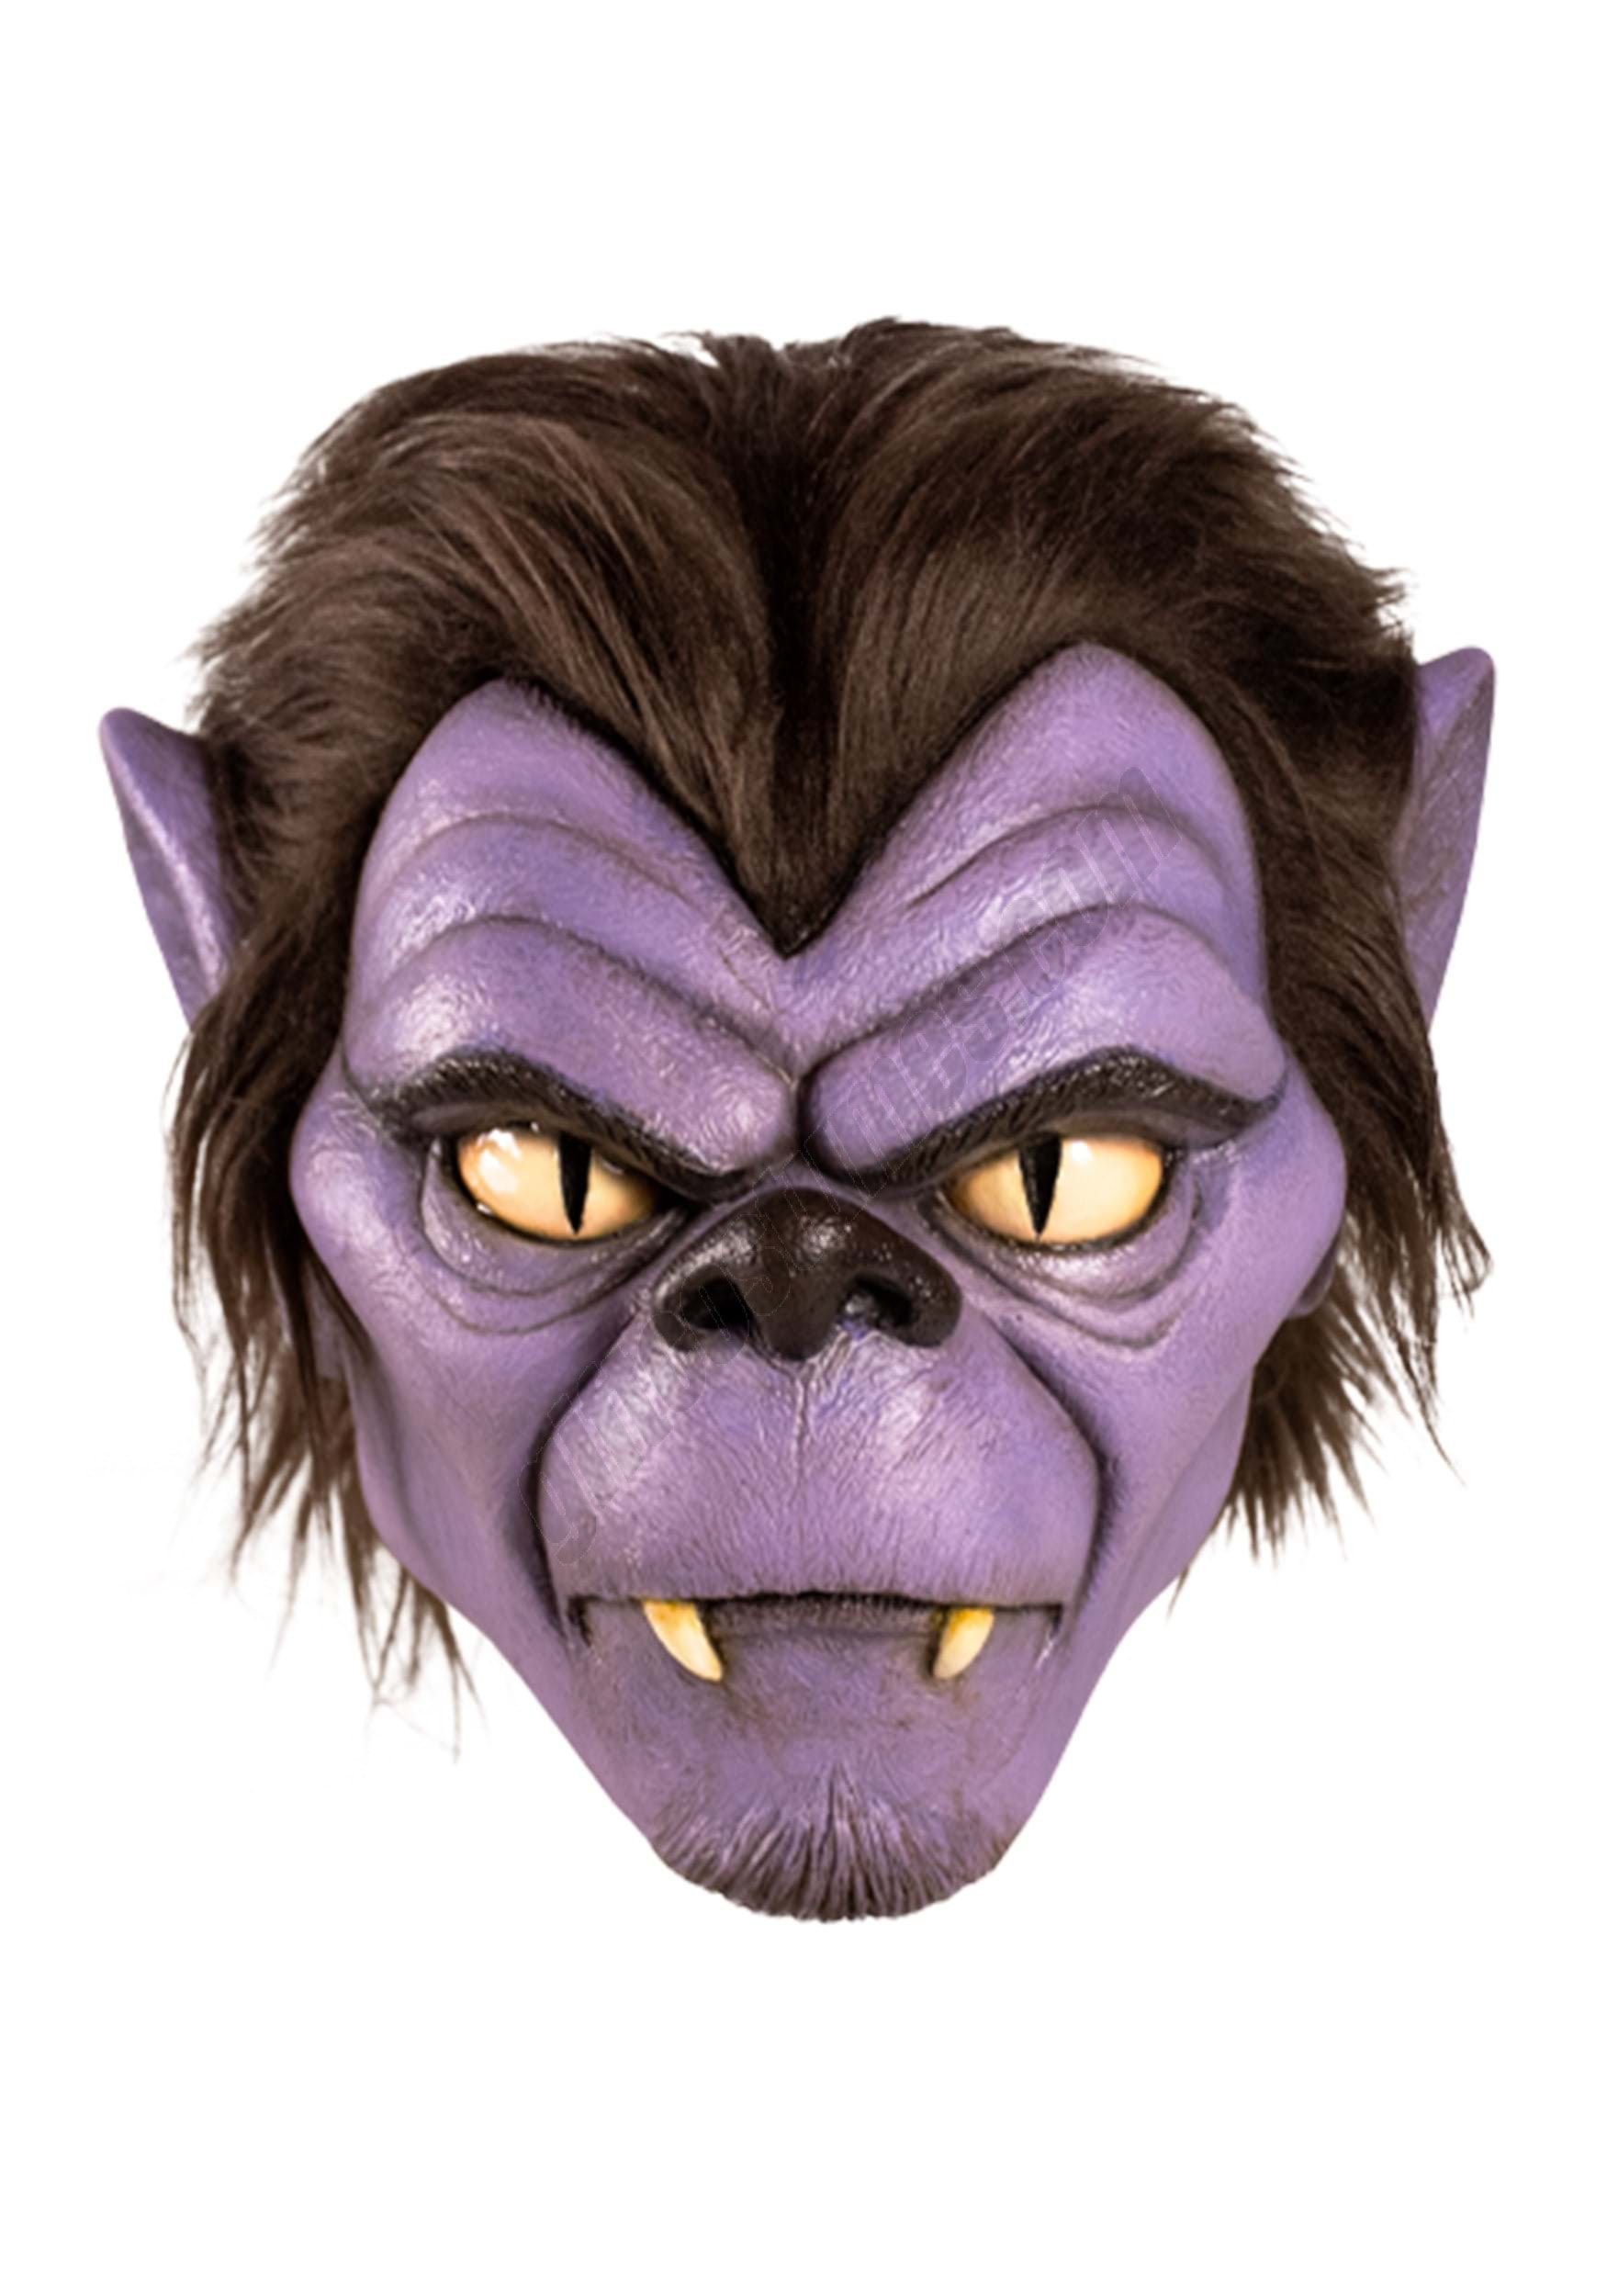 Wolfman Mask from Scooby Doo  Promotions - Wolfman Mask from Scooby Doo  Promotions